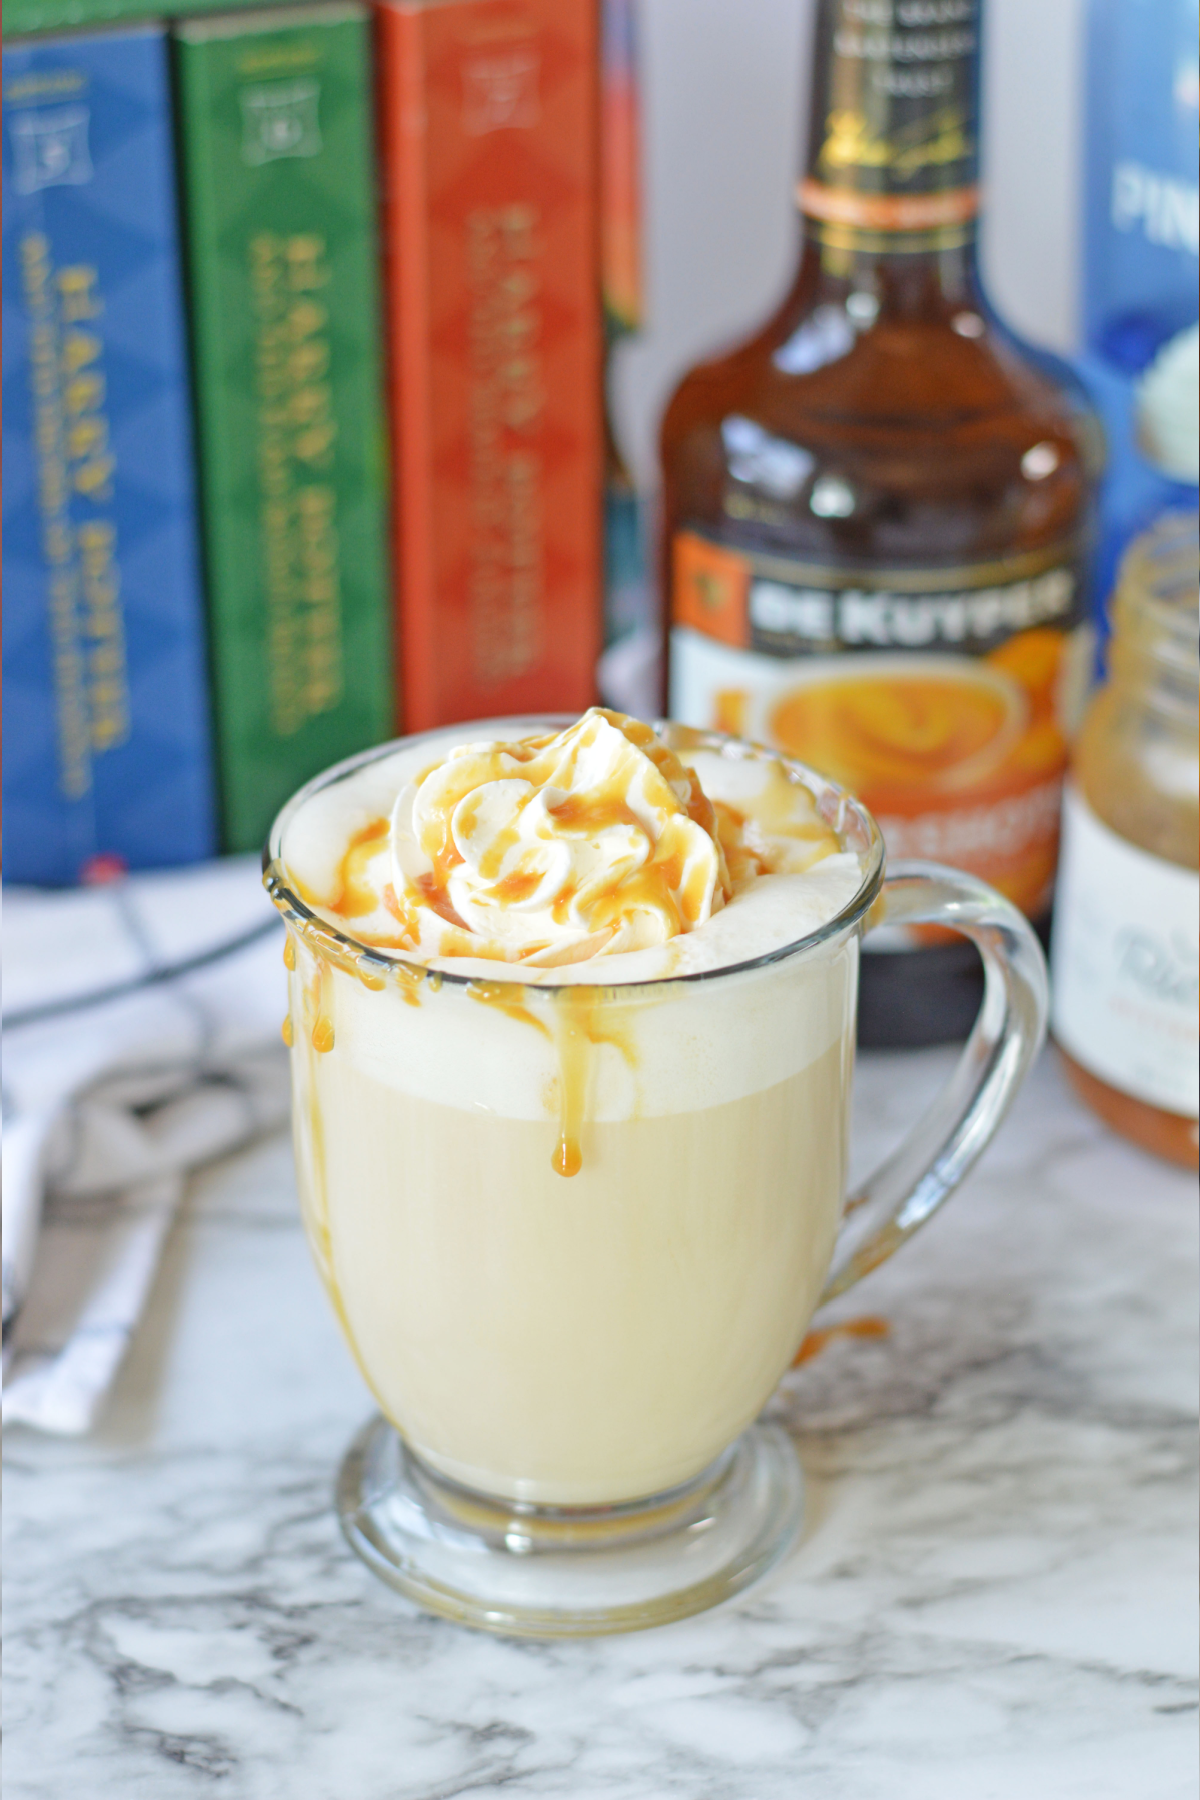 Hot boozy butterbeer with Harry Potter books and alcohol in background